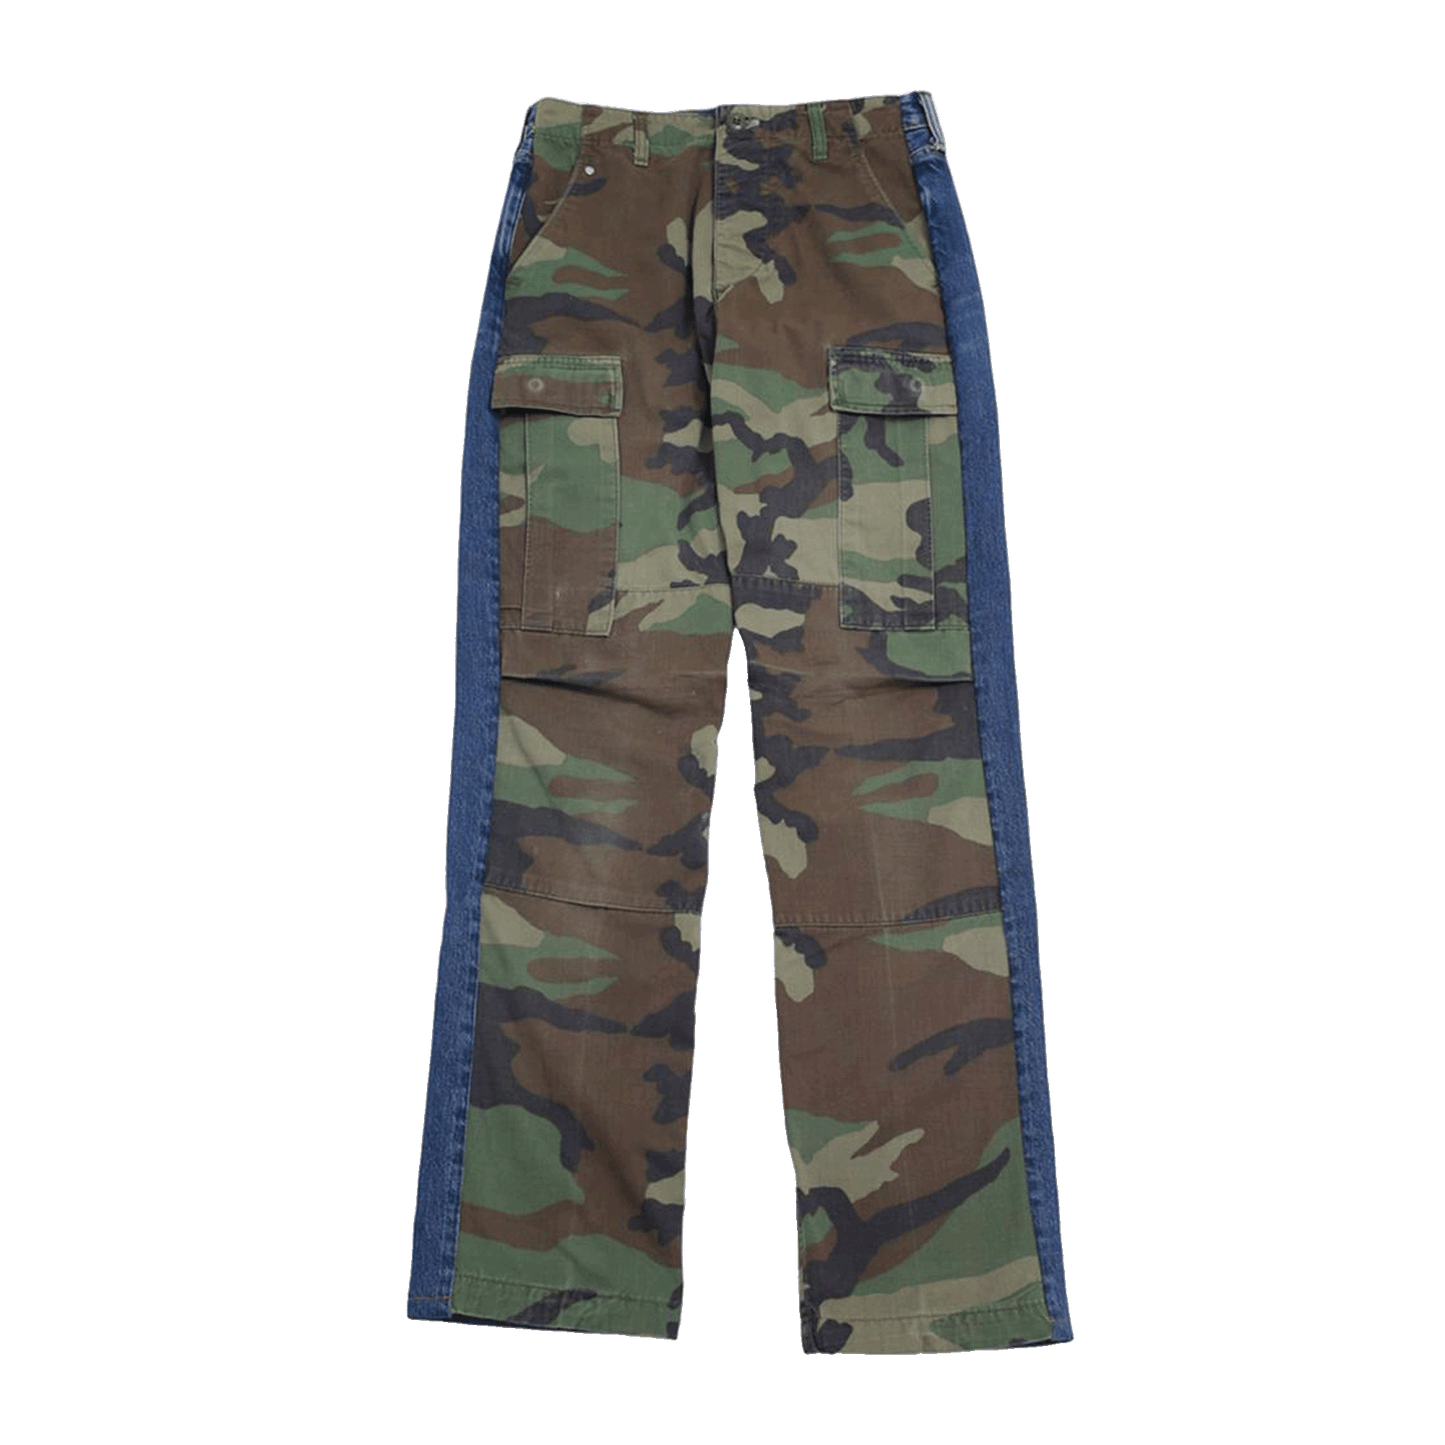 Nº77 Camouflagejeans Camouflage / Denimblue